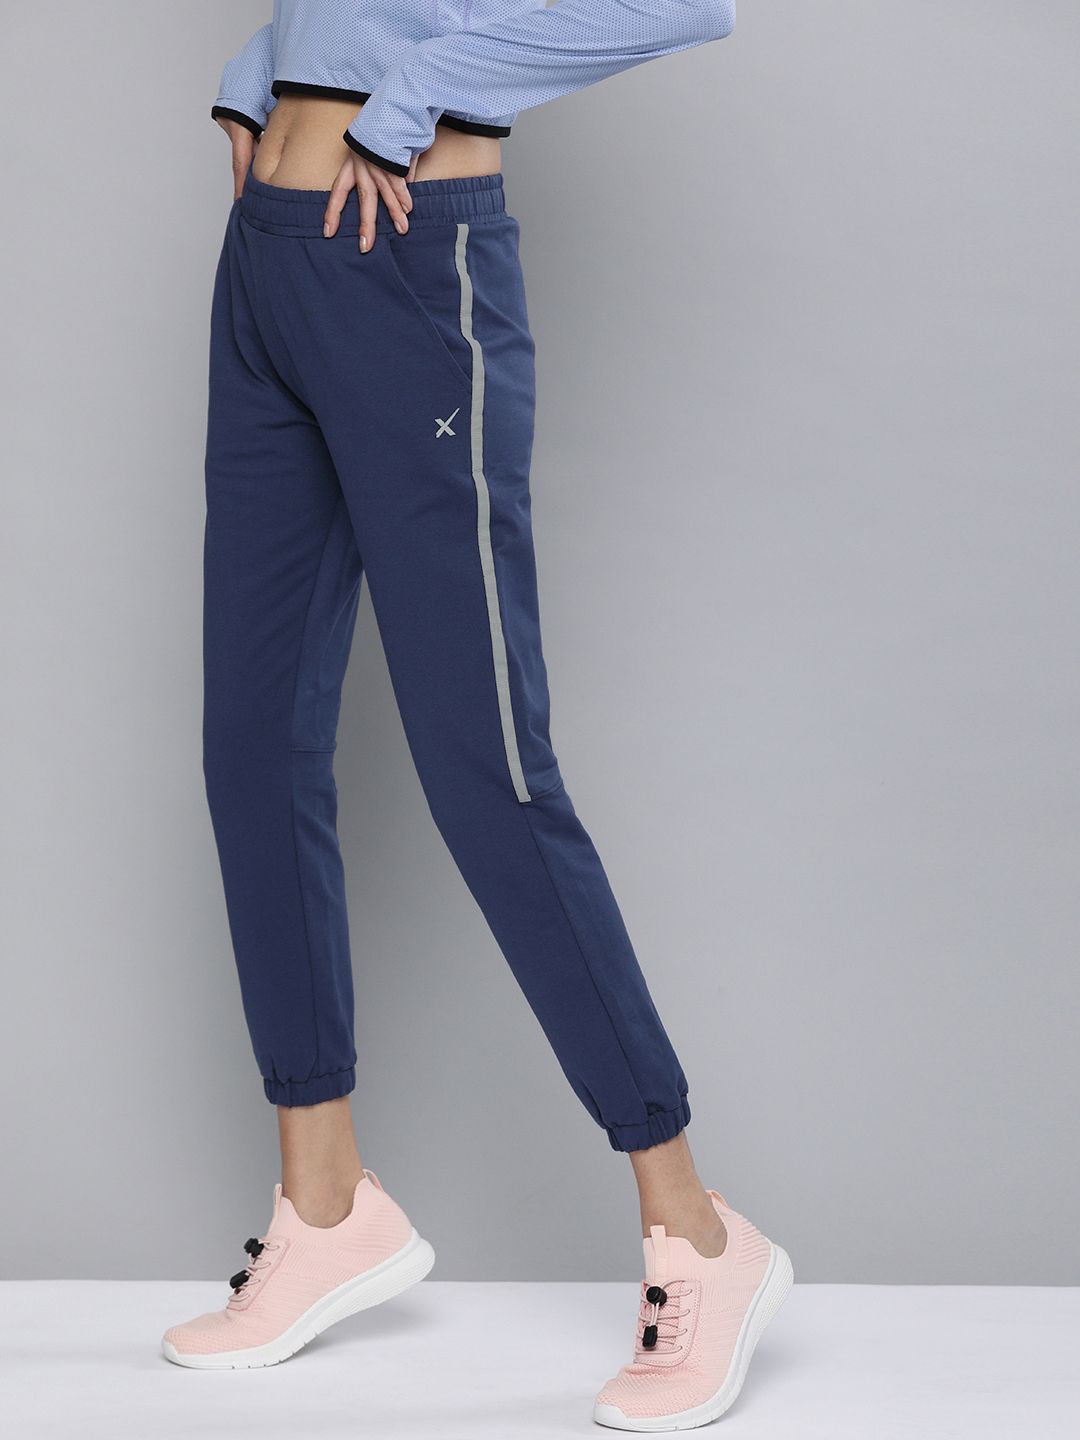 HRX By Hrithik Roshan Women Medieval Blue Solid Slim Fit Lycra Rapid-Dry Antimicrobial Training Joggers Price in India